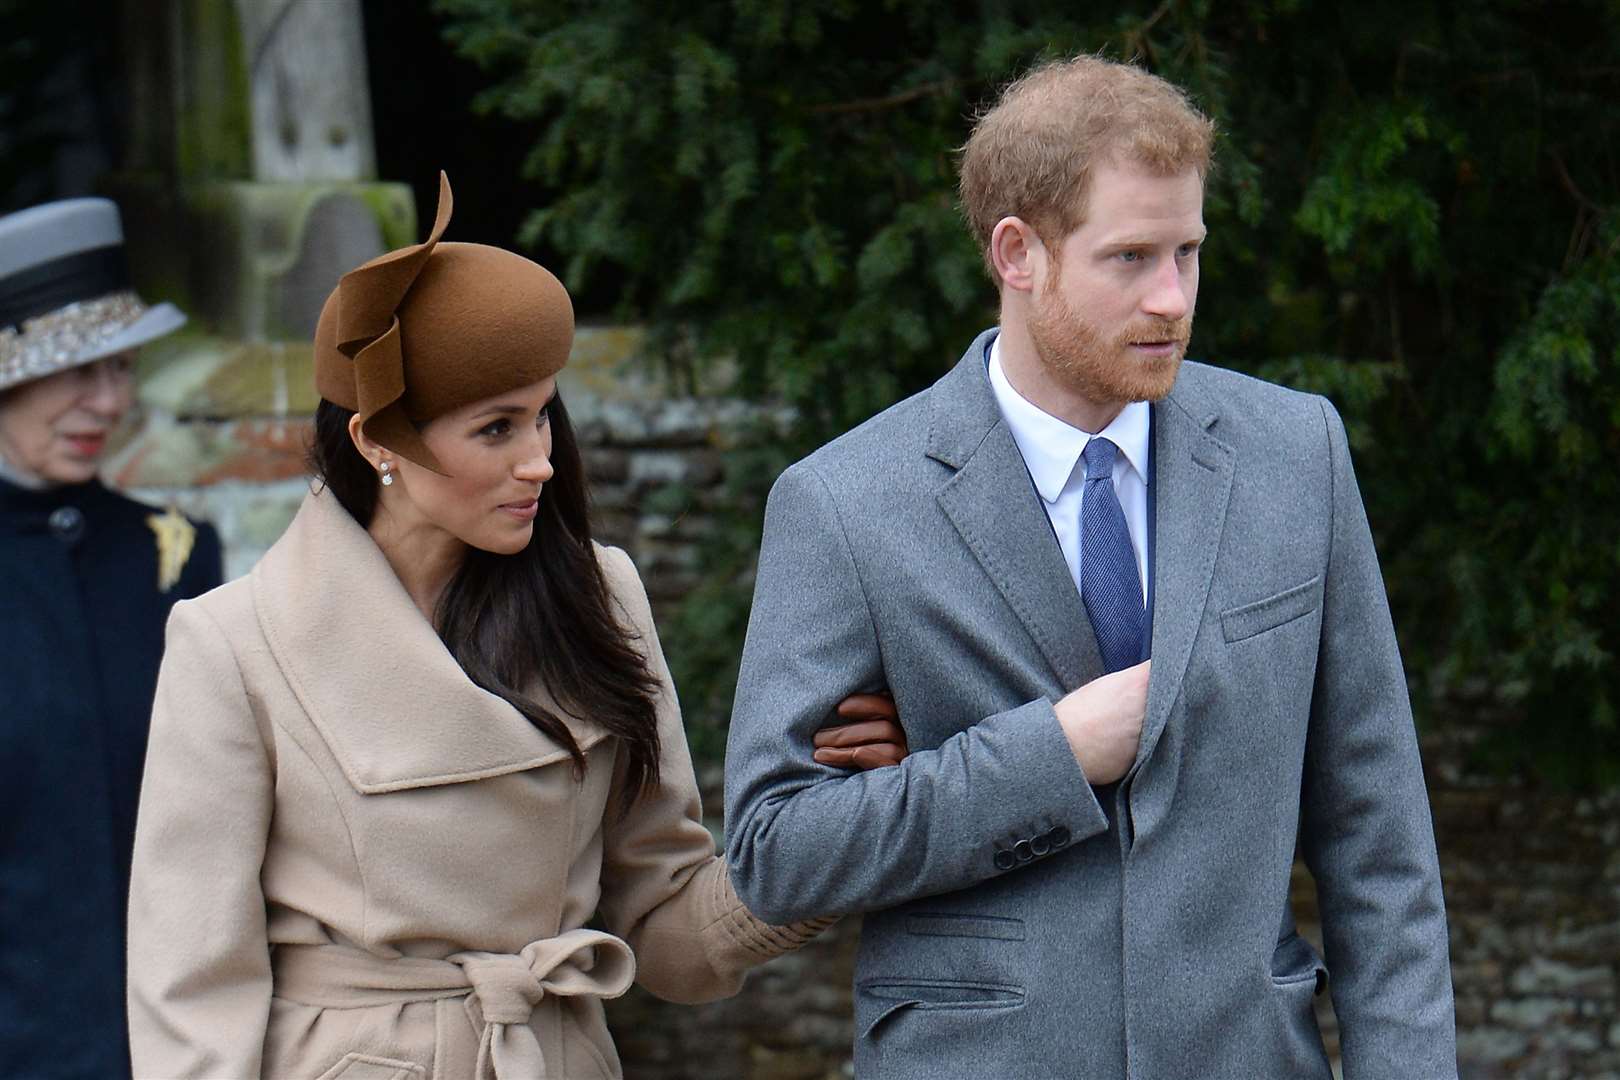 The Duke and Duchess of Sussex leaving the Christmas Day morning church service at St Mary Magdalene Church in Sandringham, Norfolk (Joe Giddens/PA)